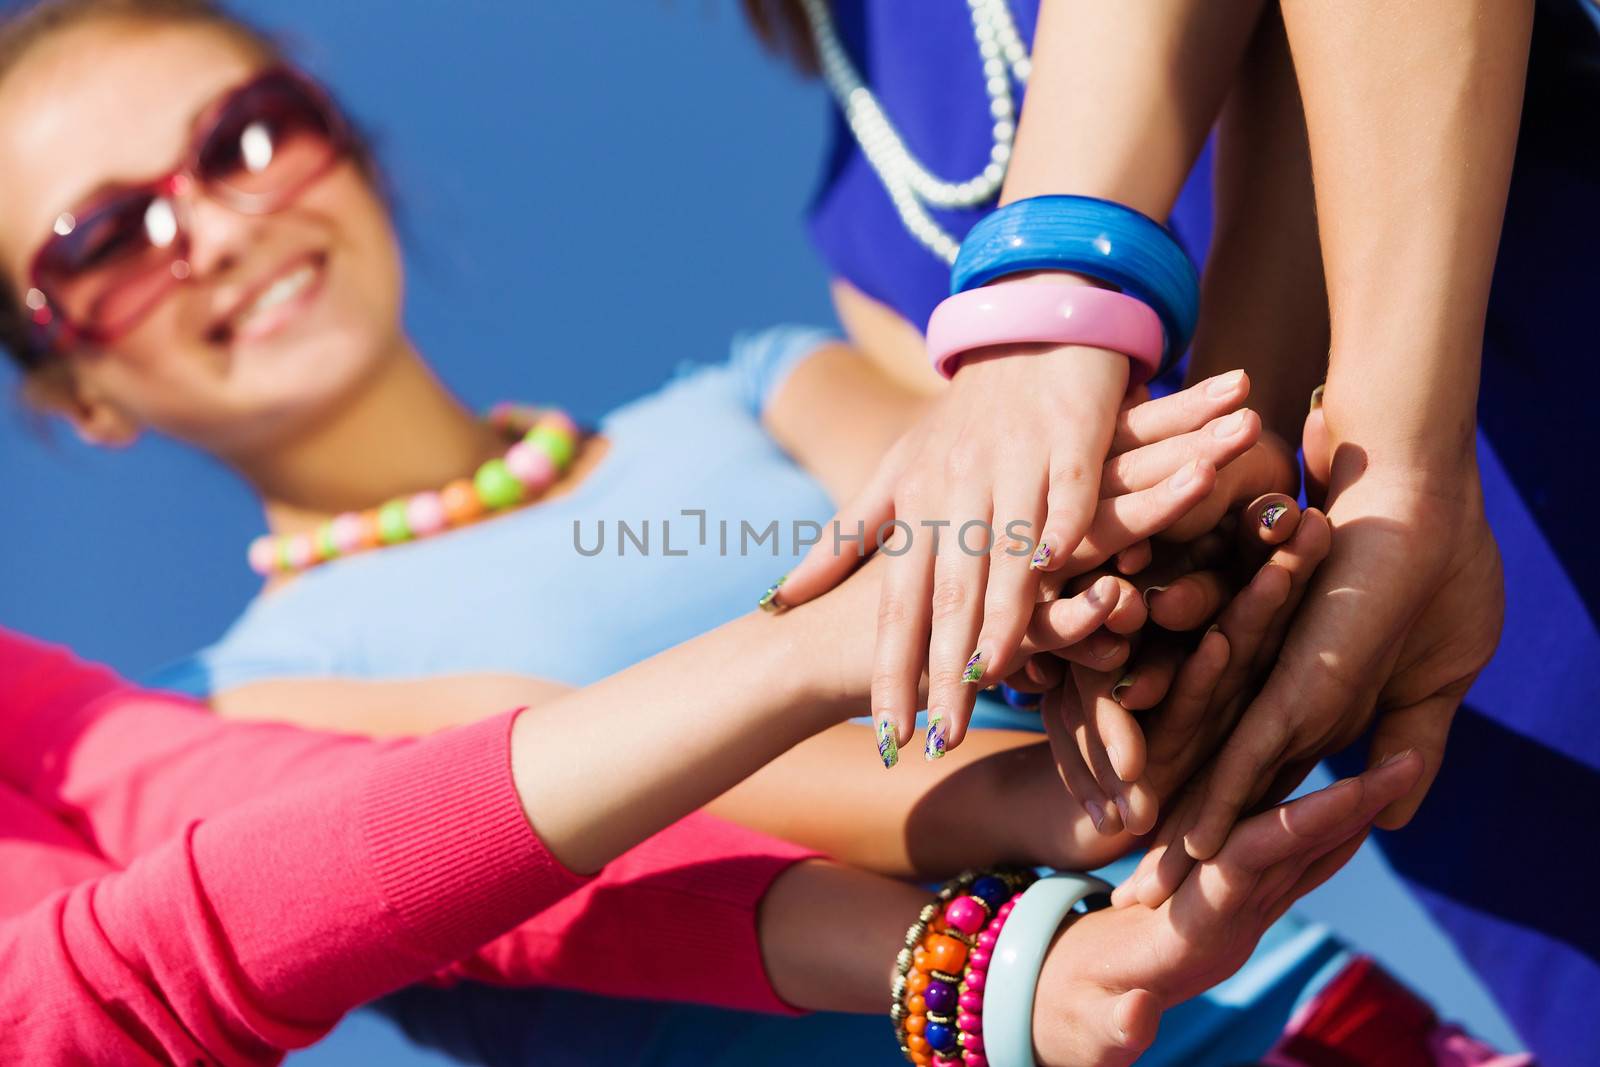 Group of young happy people. Unity concept